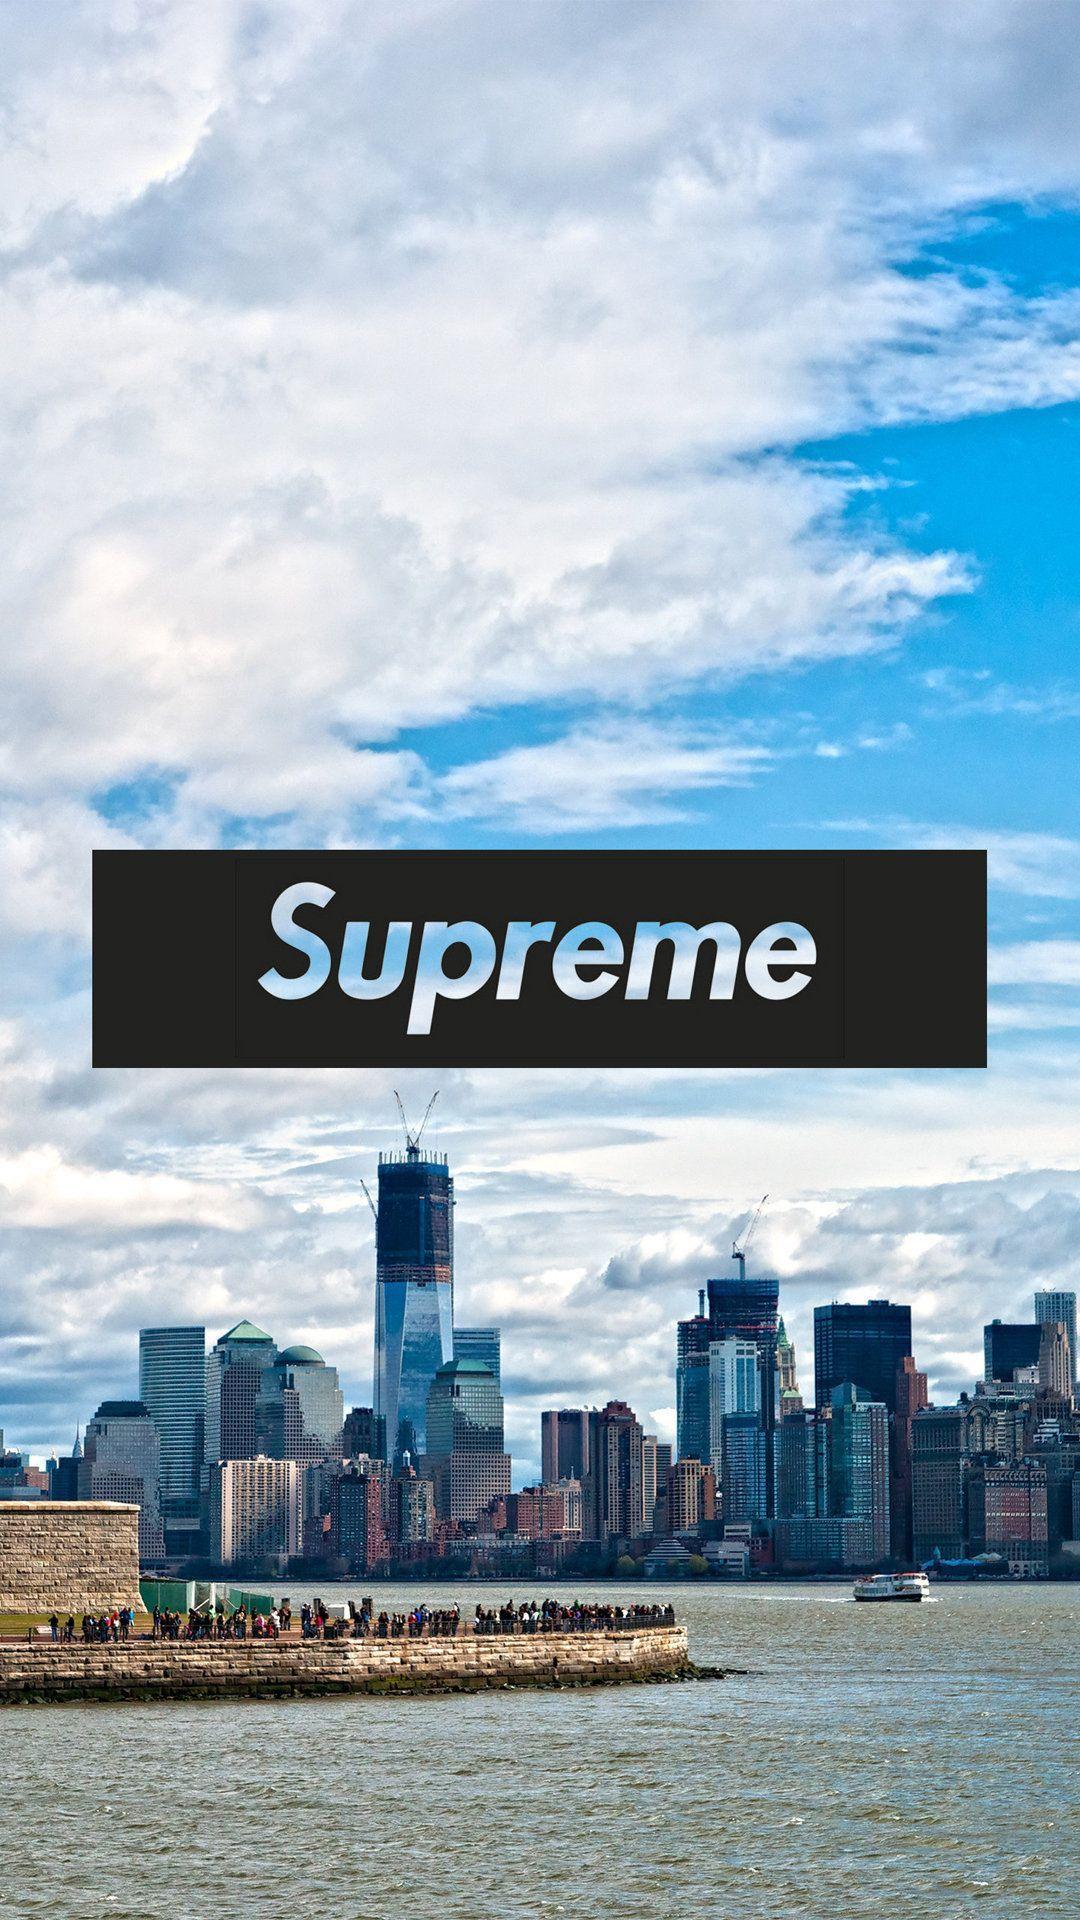 Supreme Cloud Wallpapers - Top Free Supreme Cloud Backgrounds ...